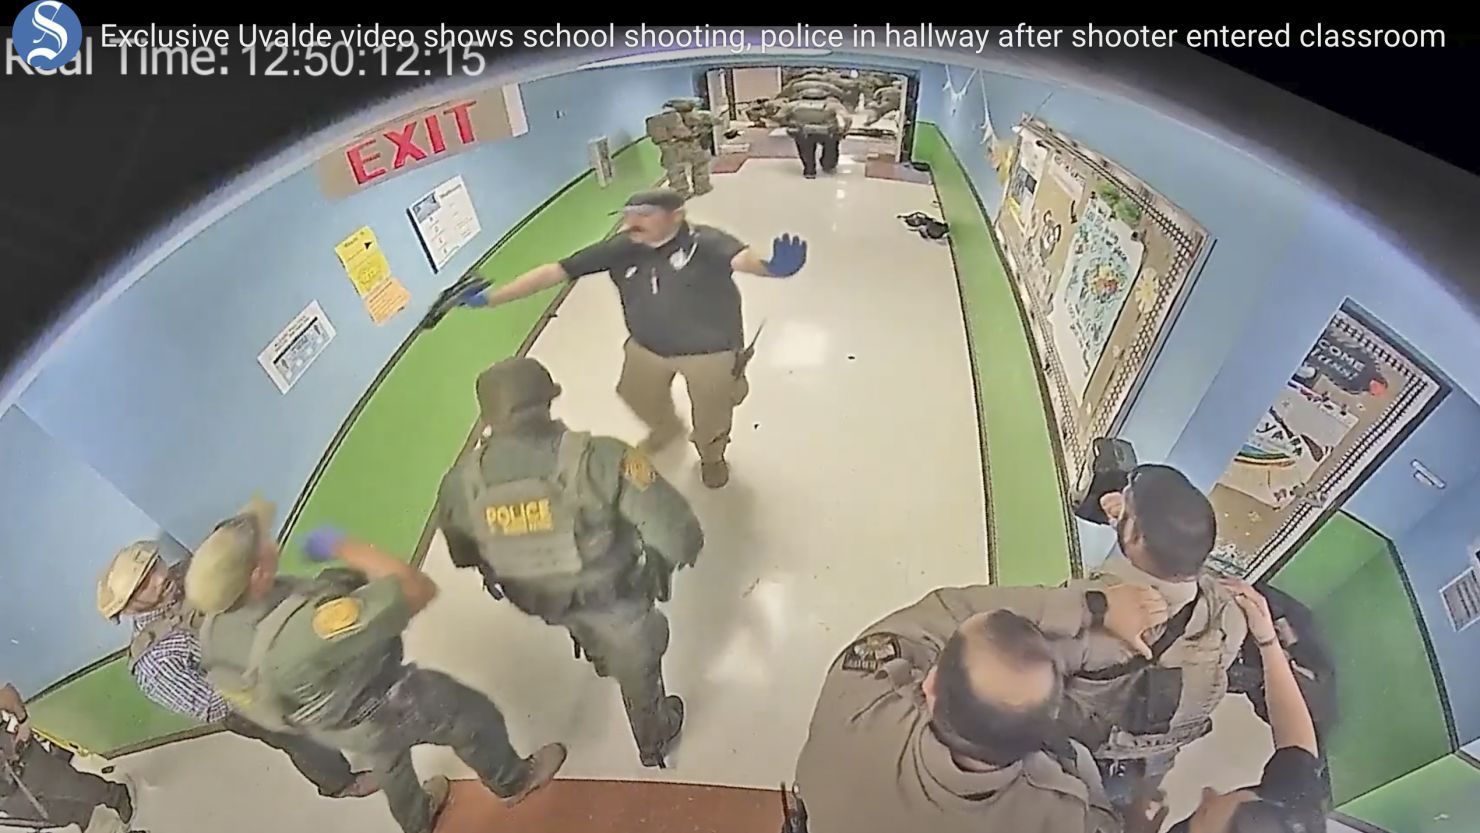 Surveillance video shows authorities responding to the shooting at Robb Elementary School in Uvalde, Texas, on May 24. 